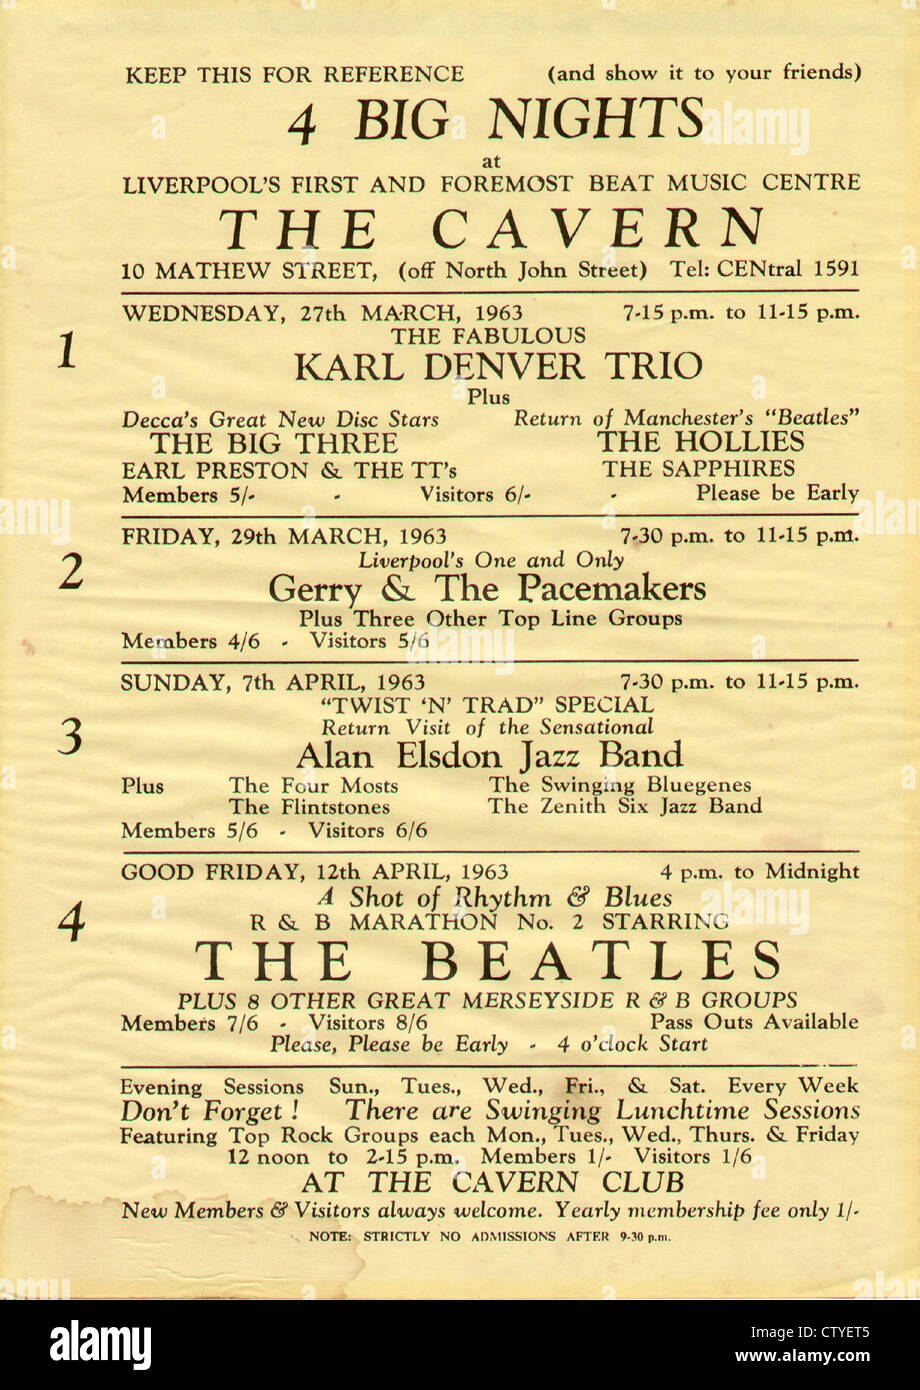 000753 - The Beatles Cavern Club Poster from 12th April 1963 Stock Photo